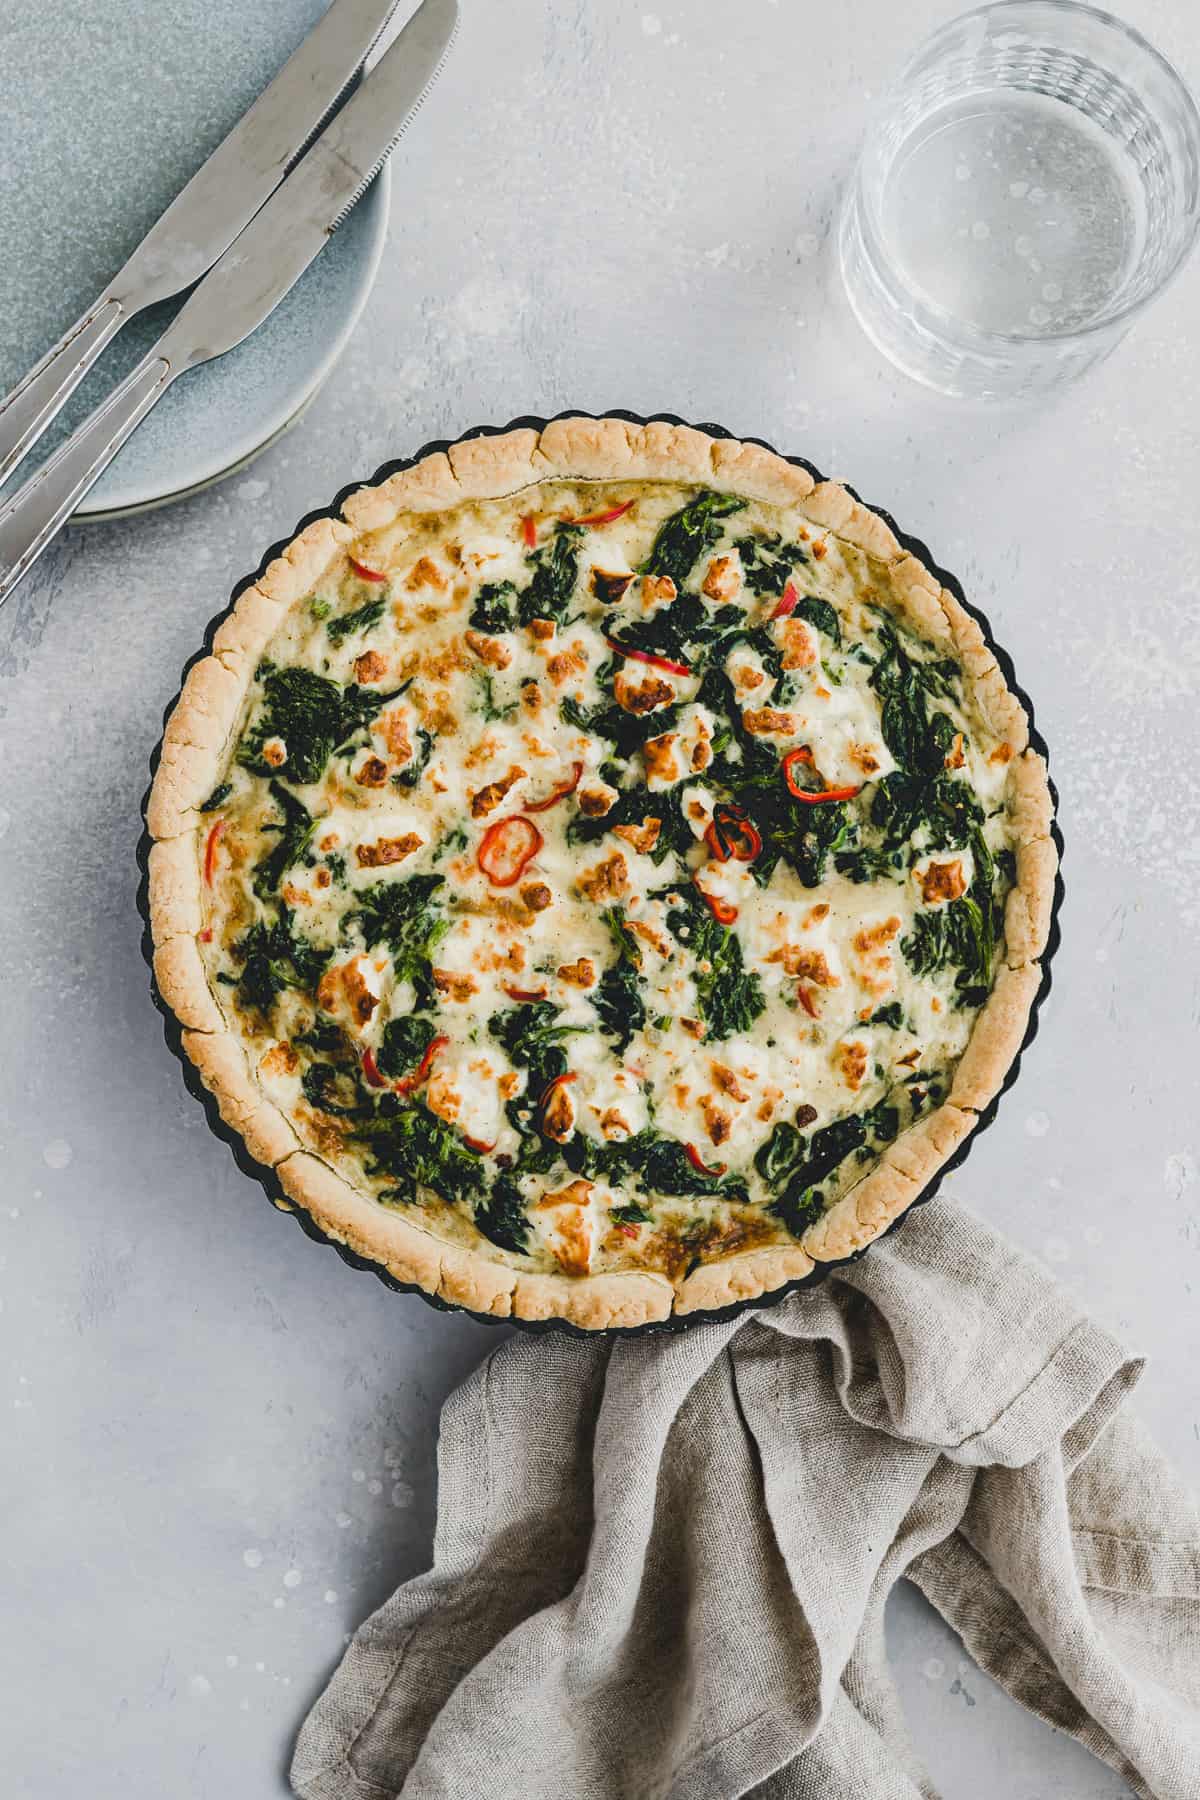 spinach feta quiche next to a glass of water and two plates